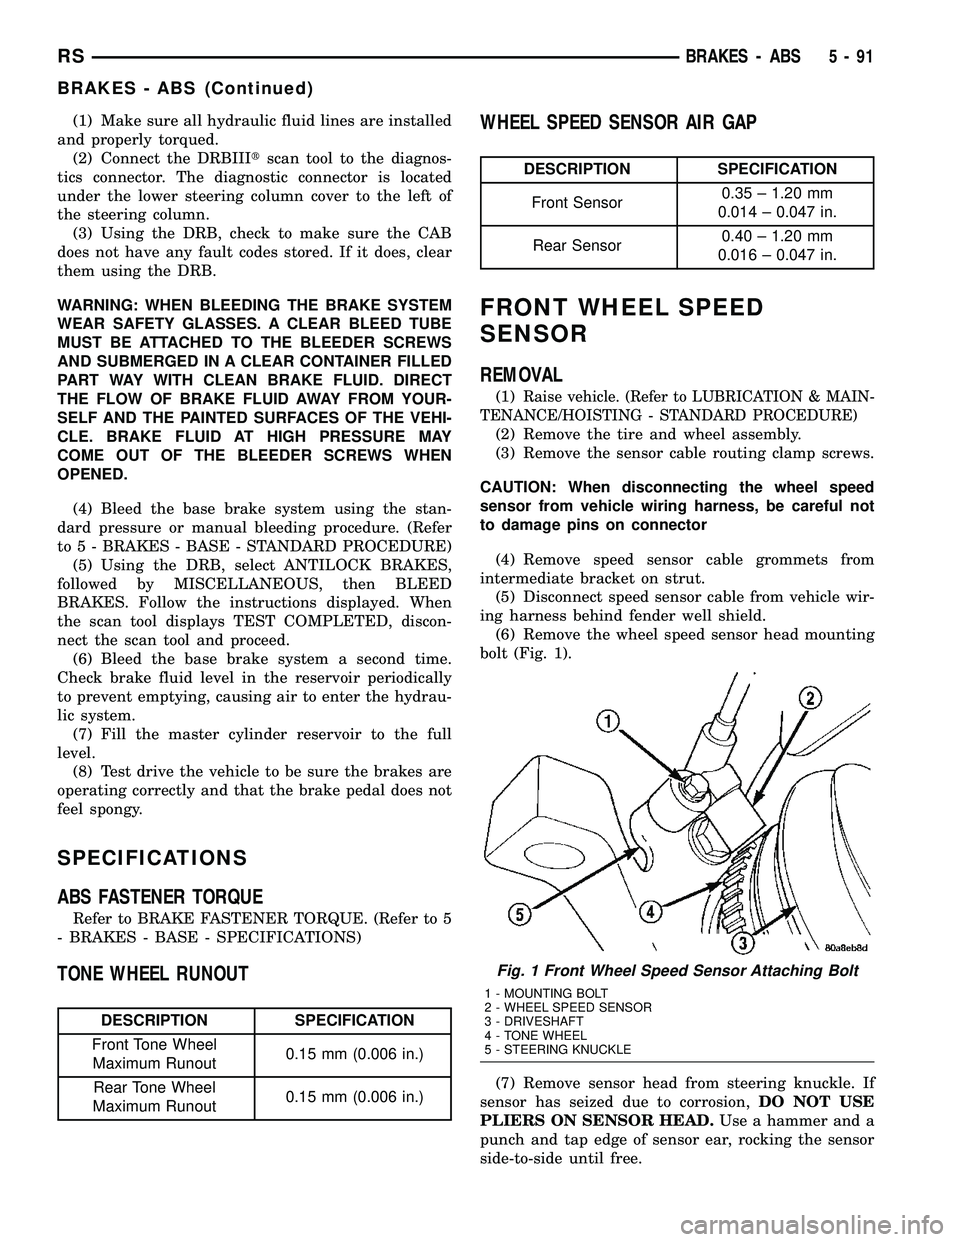 CHRYSLER VOYAGER 2005  Service Manual (1) Make sure all hydraulic fluid lines are installed
and properly torqued.
(2) Connect the DRBIIItscan tool to the diagnos-
tics connector. The diagnostic connector is located
under the lower steerin